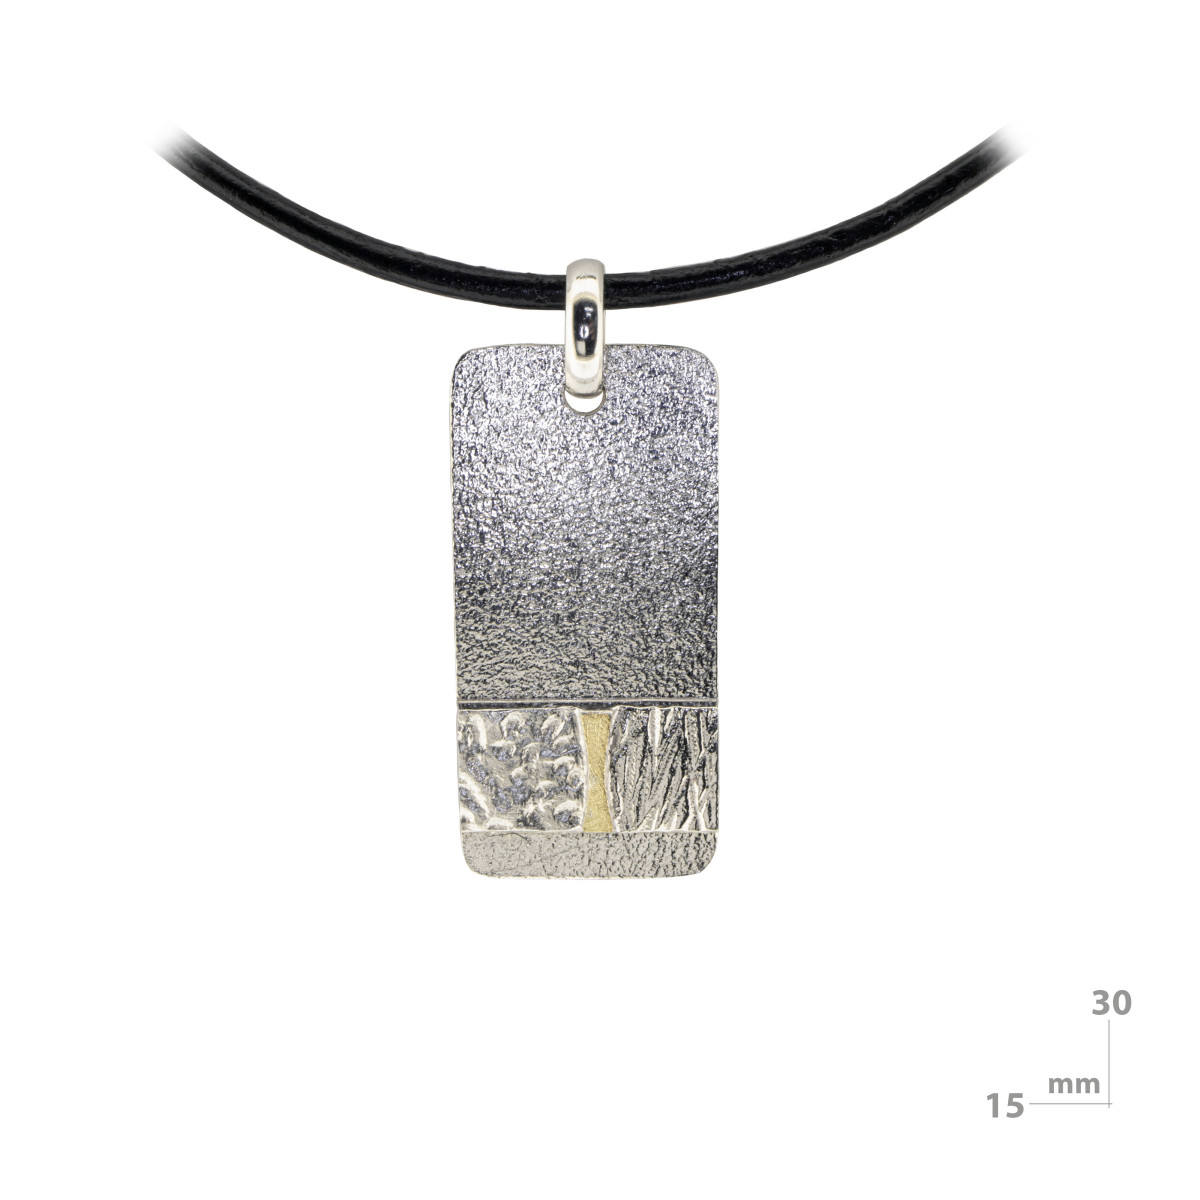 Silver and gold pendant